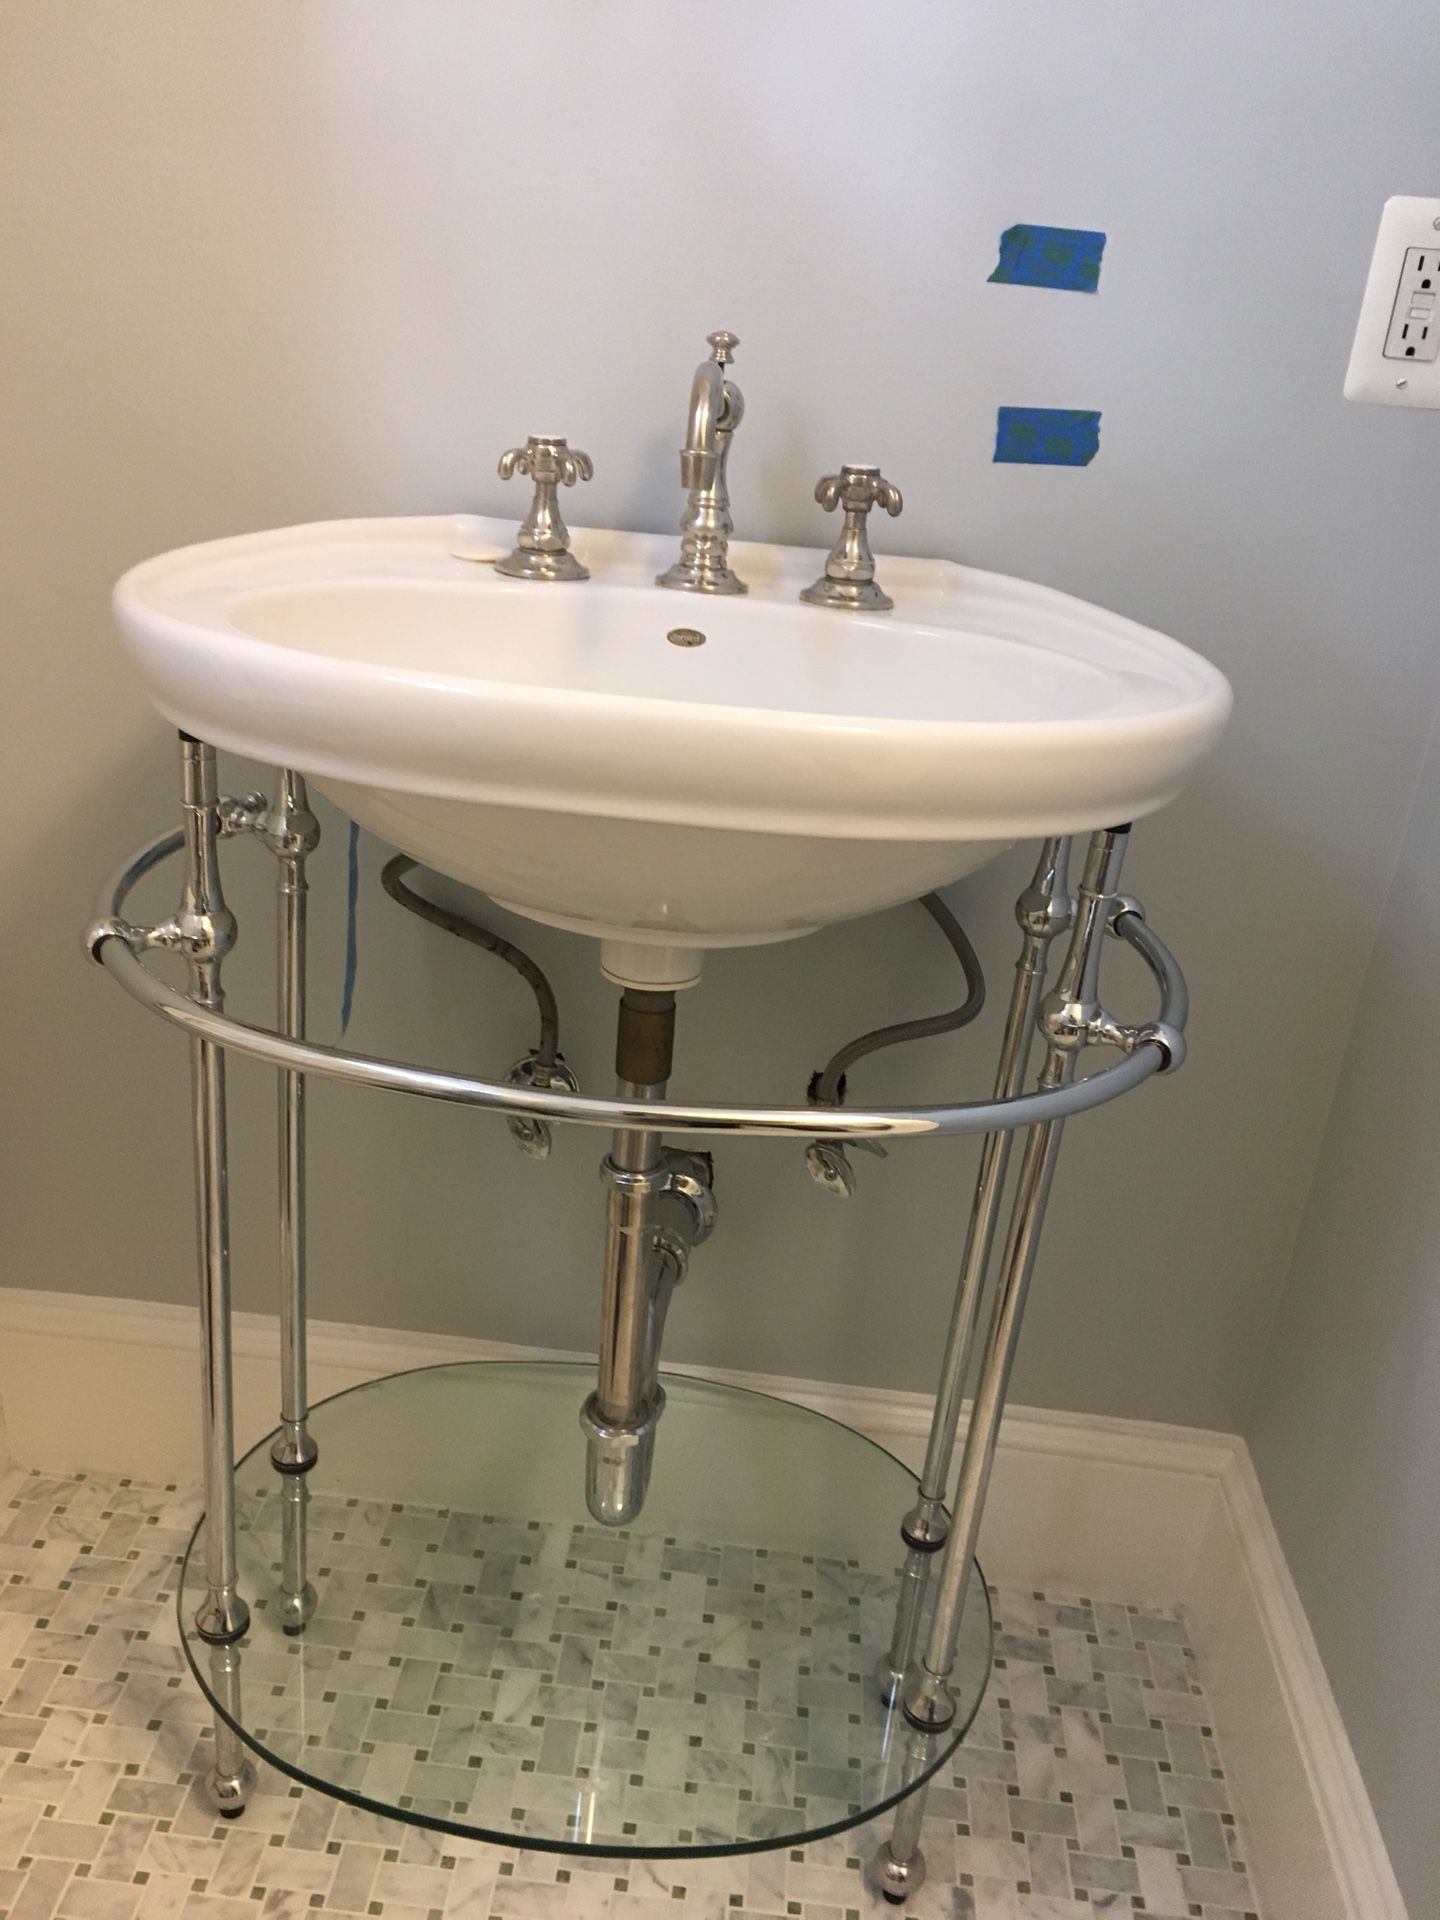 Bathroom sink in good condition , replacing with vanity cabinet